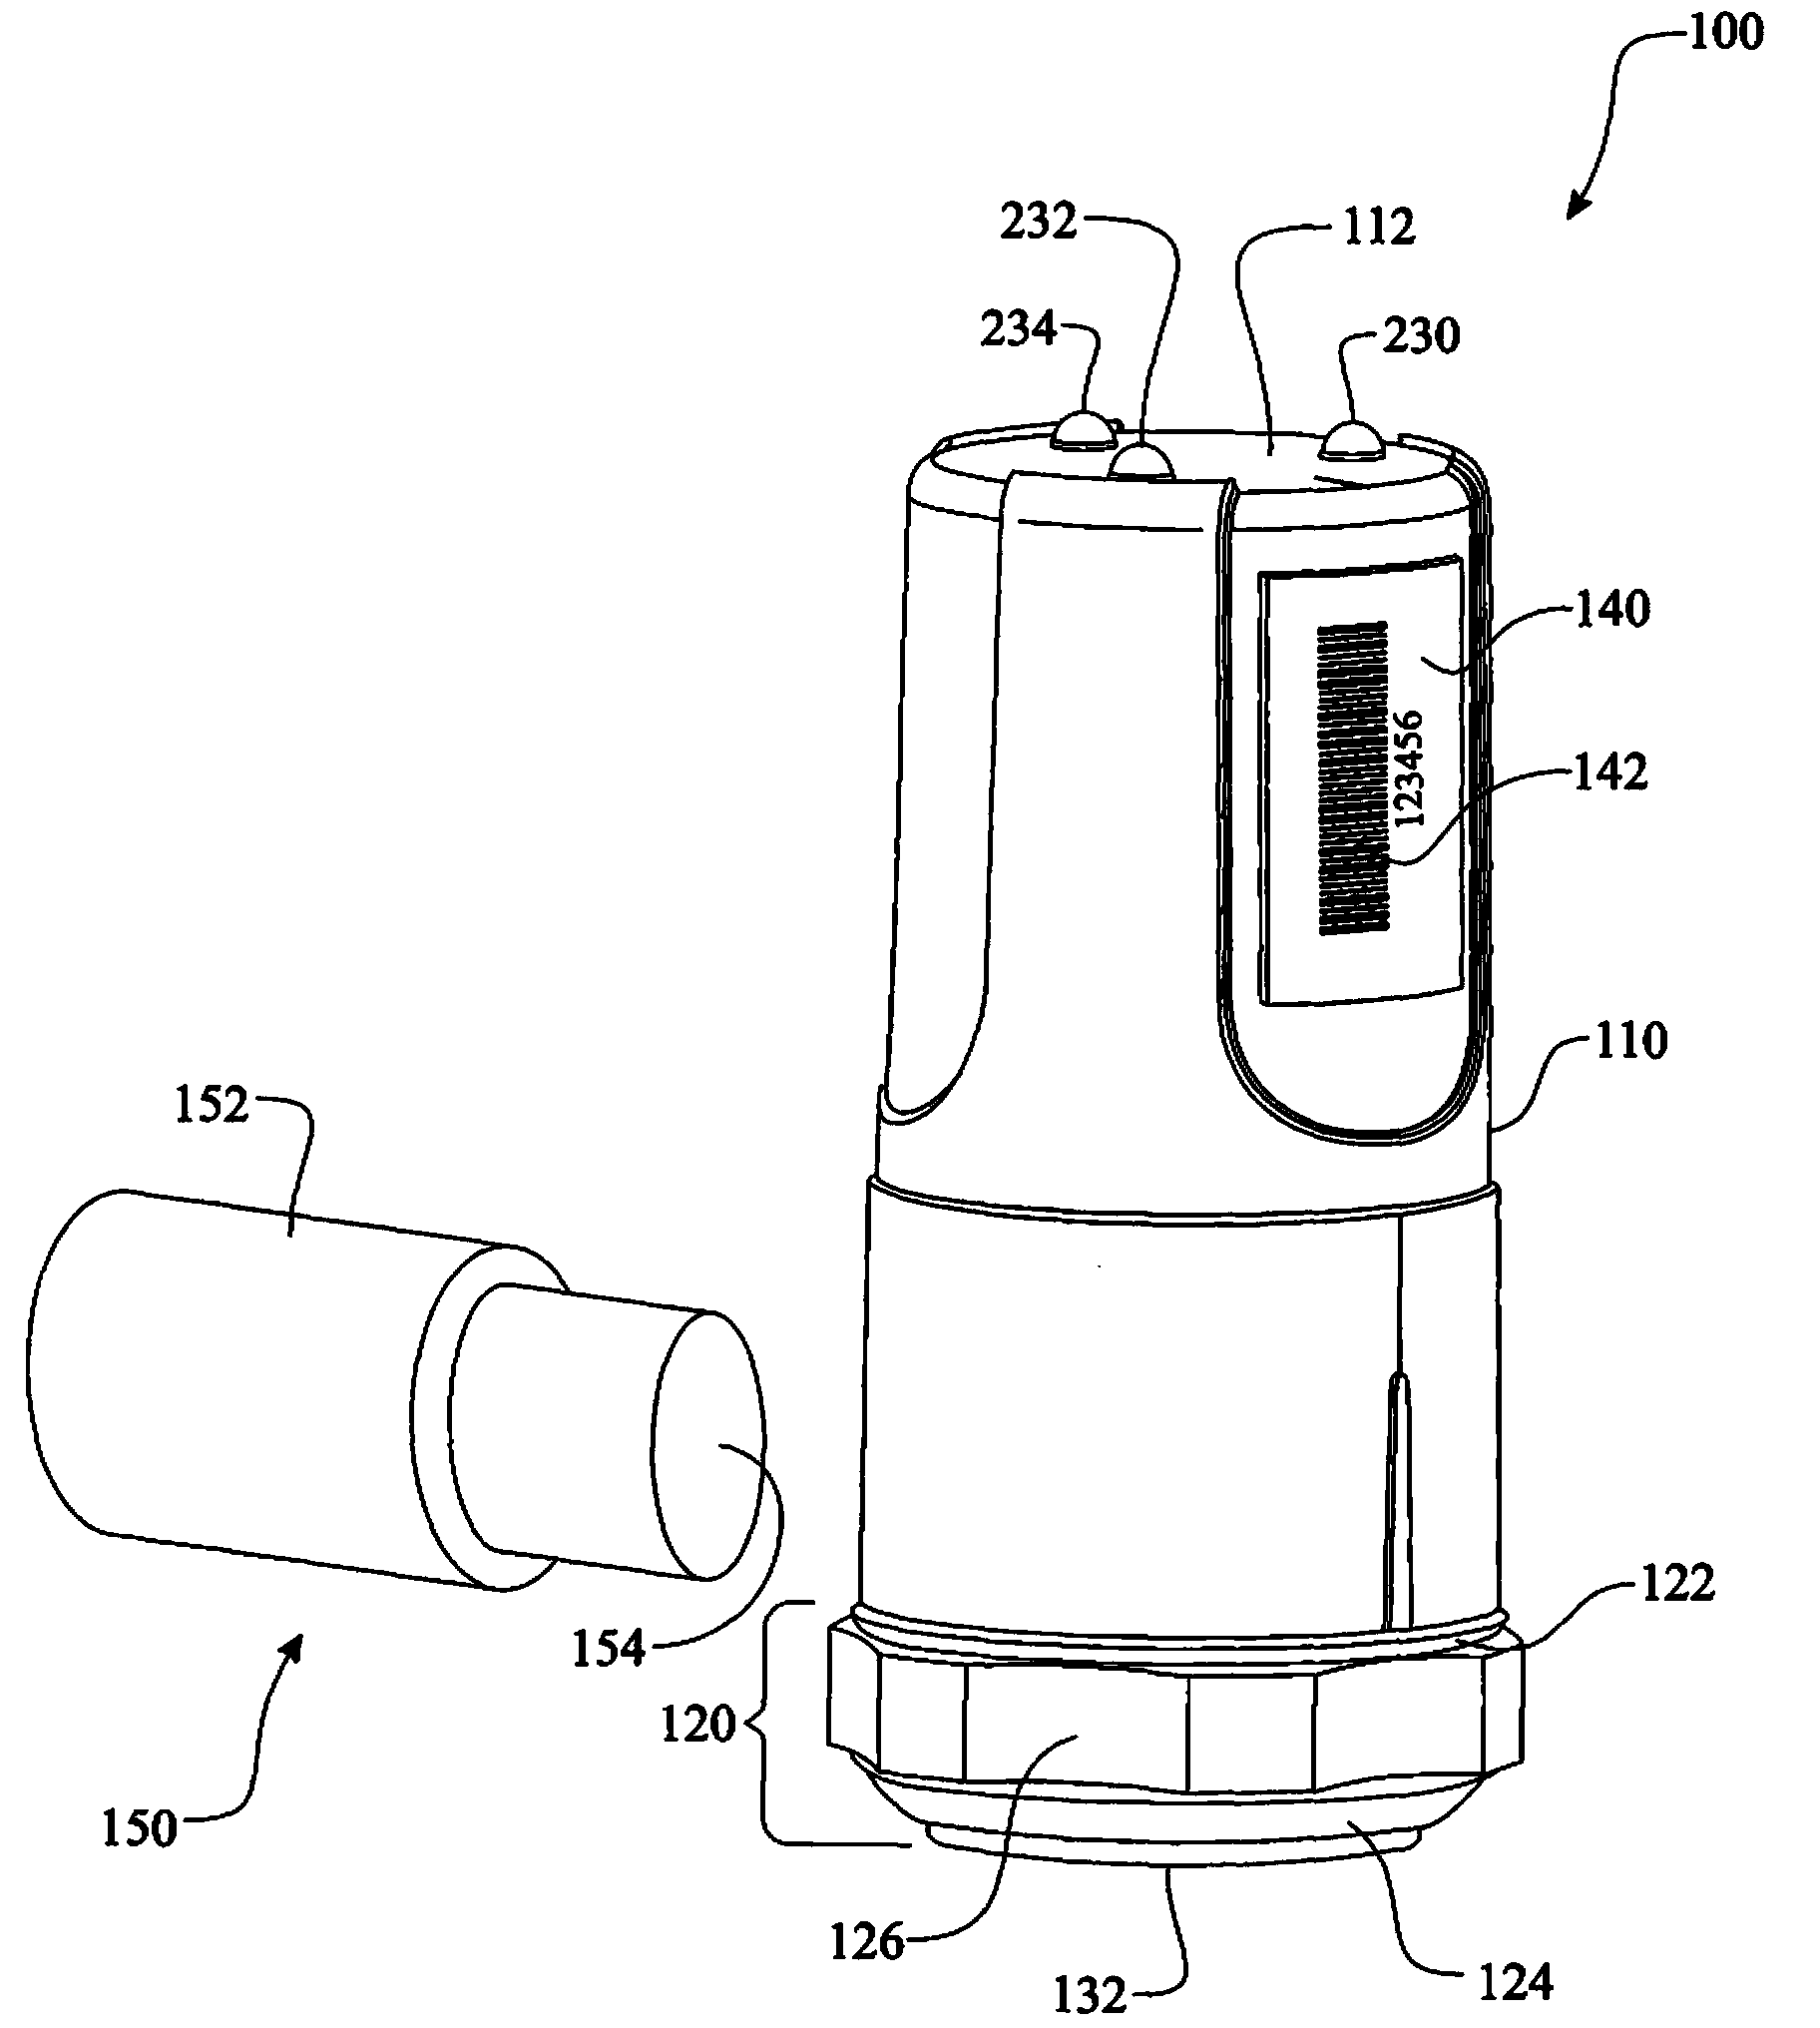 Method of monitoring health status of bearing with warning device in percentage mode